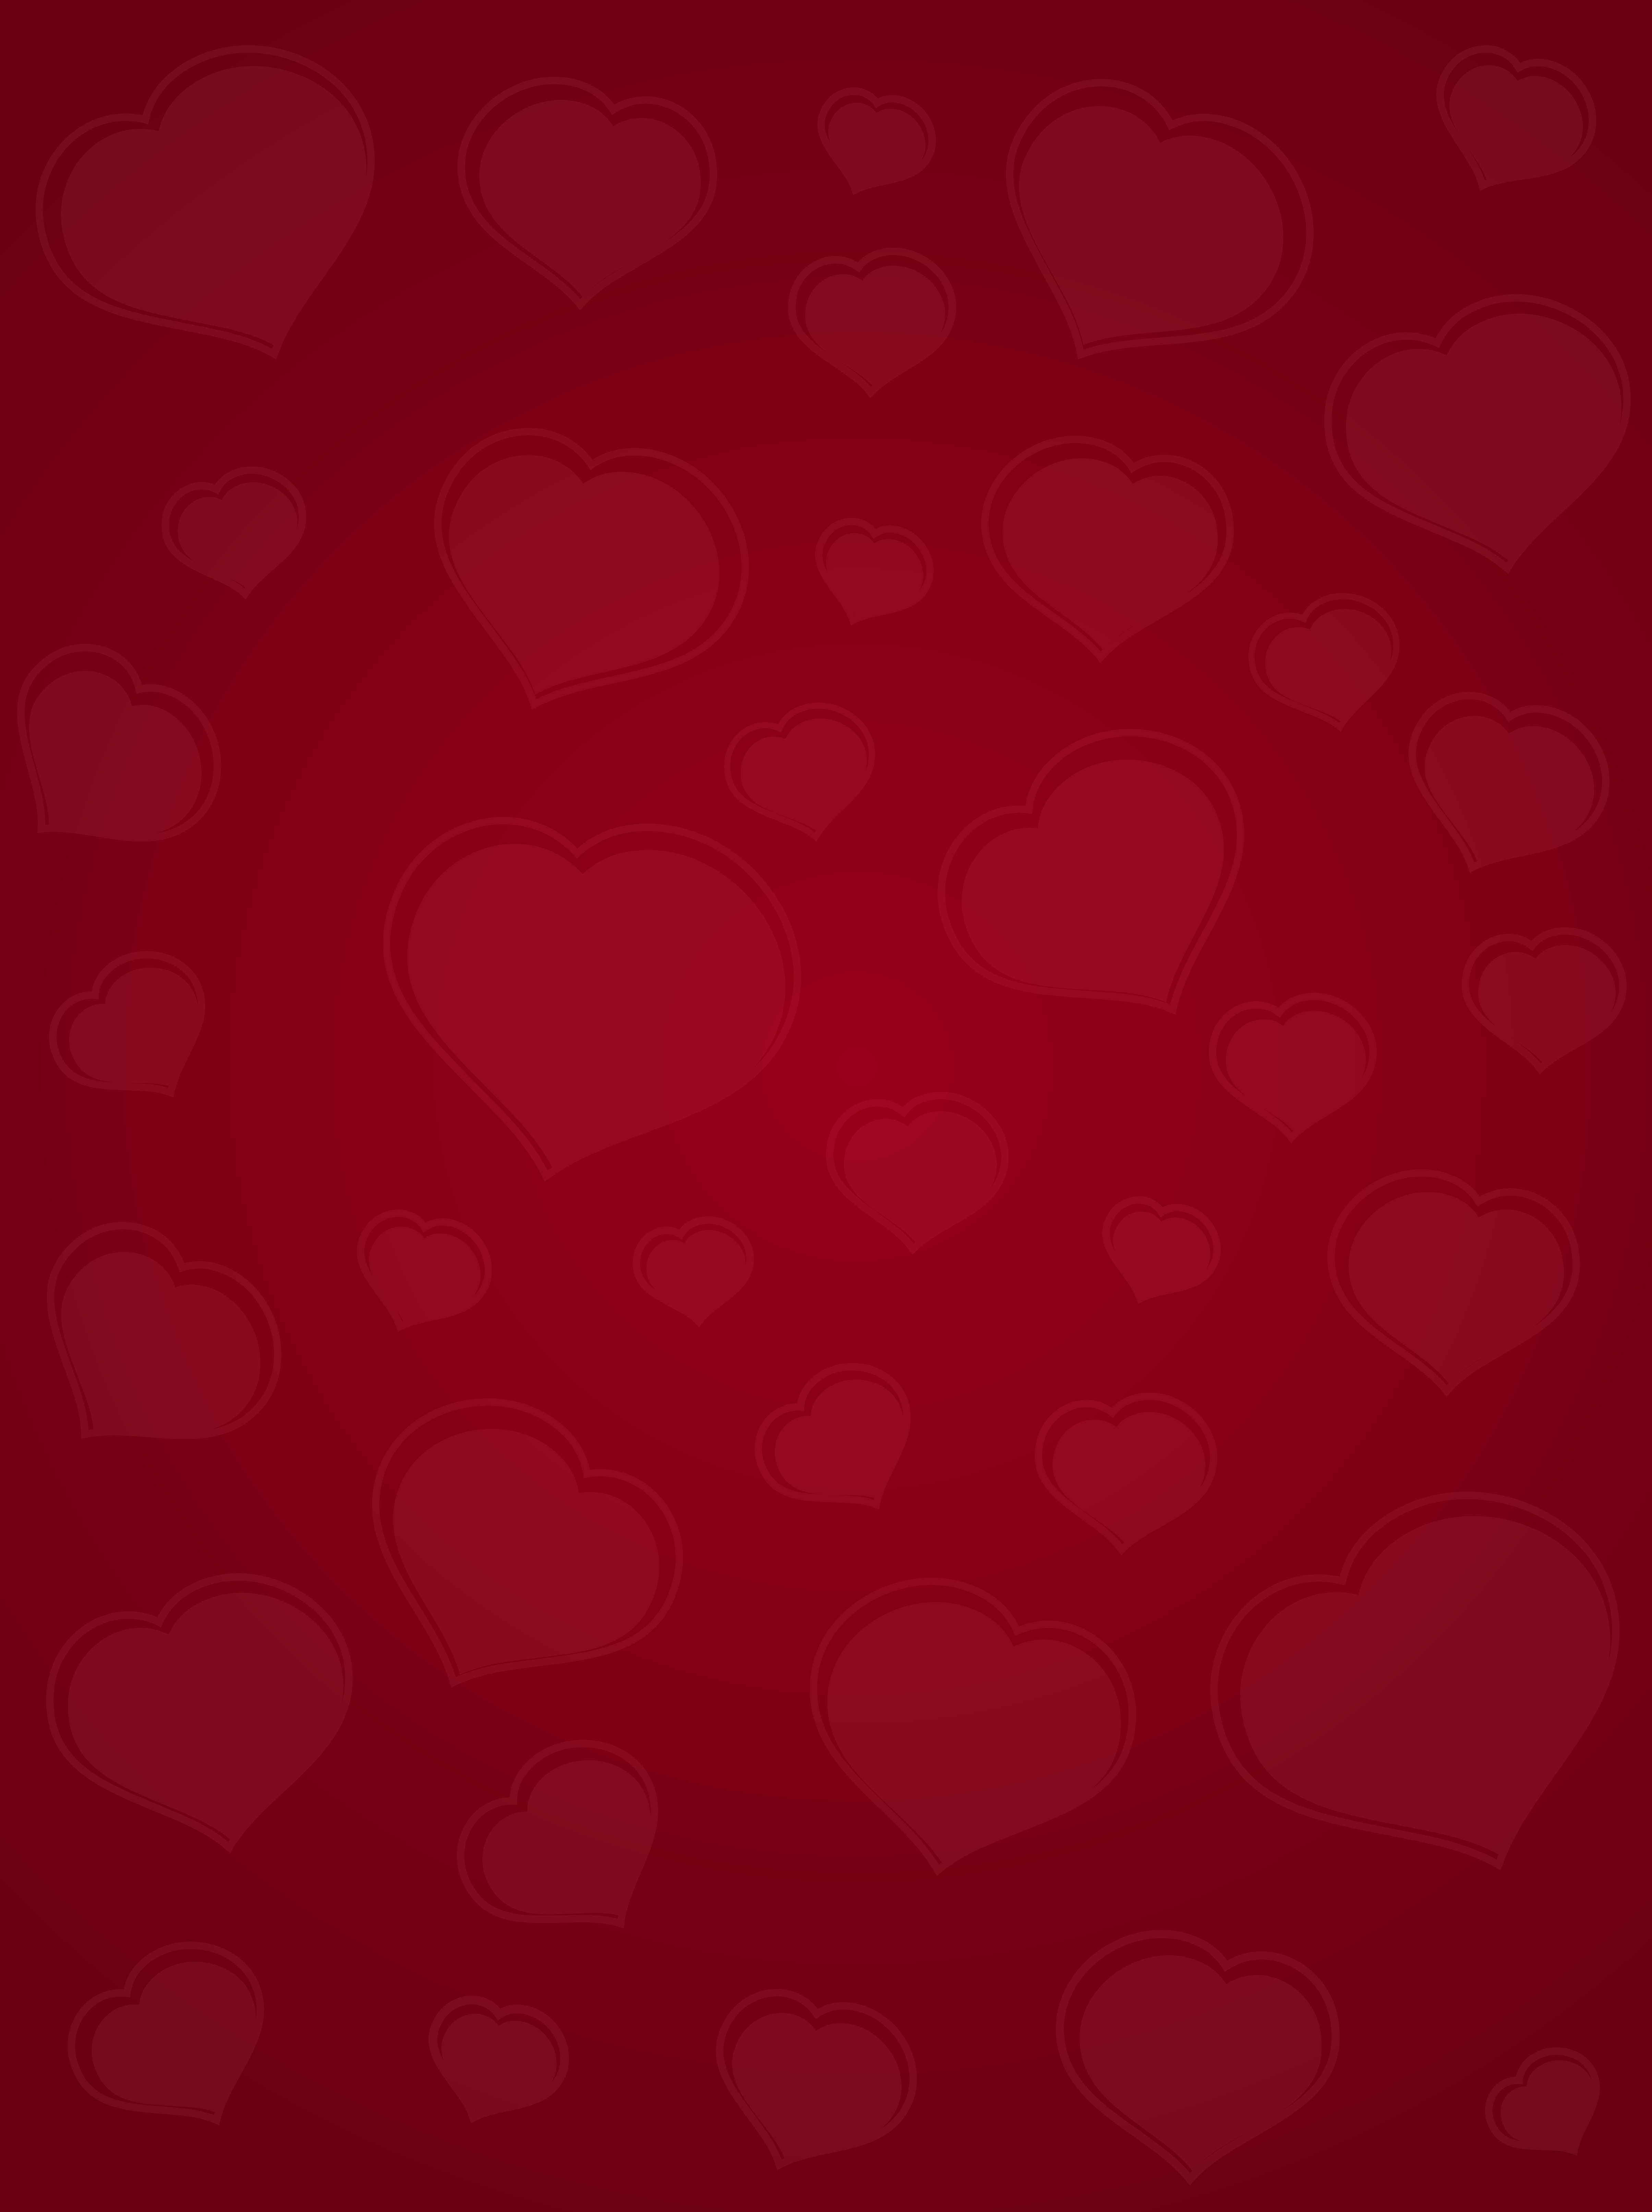 Red Valentine's Day Backgroundgallery.yopriceville.com